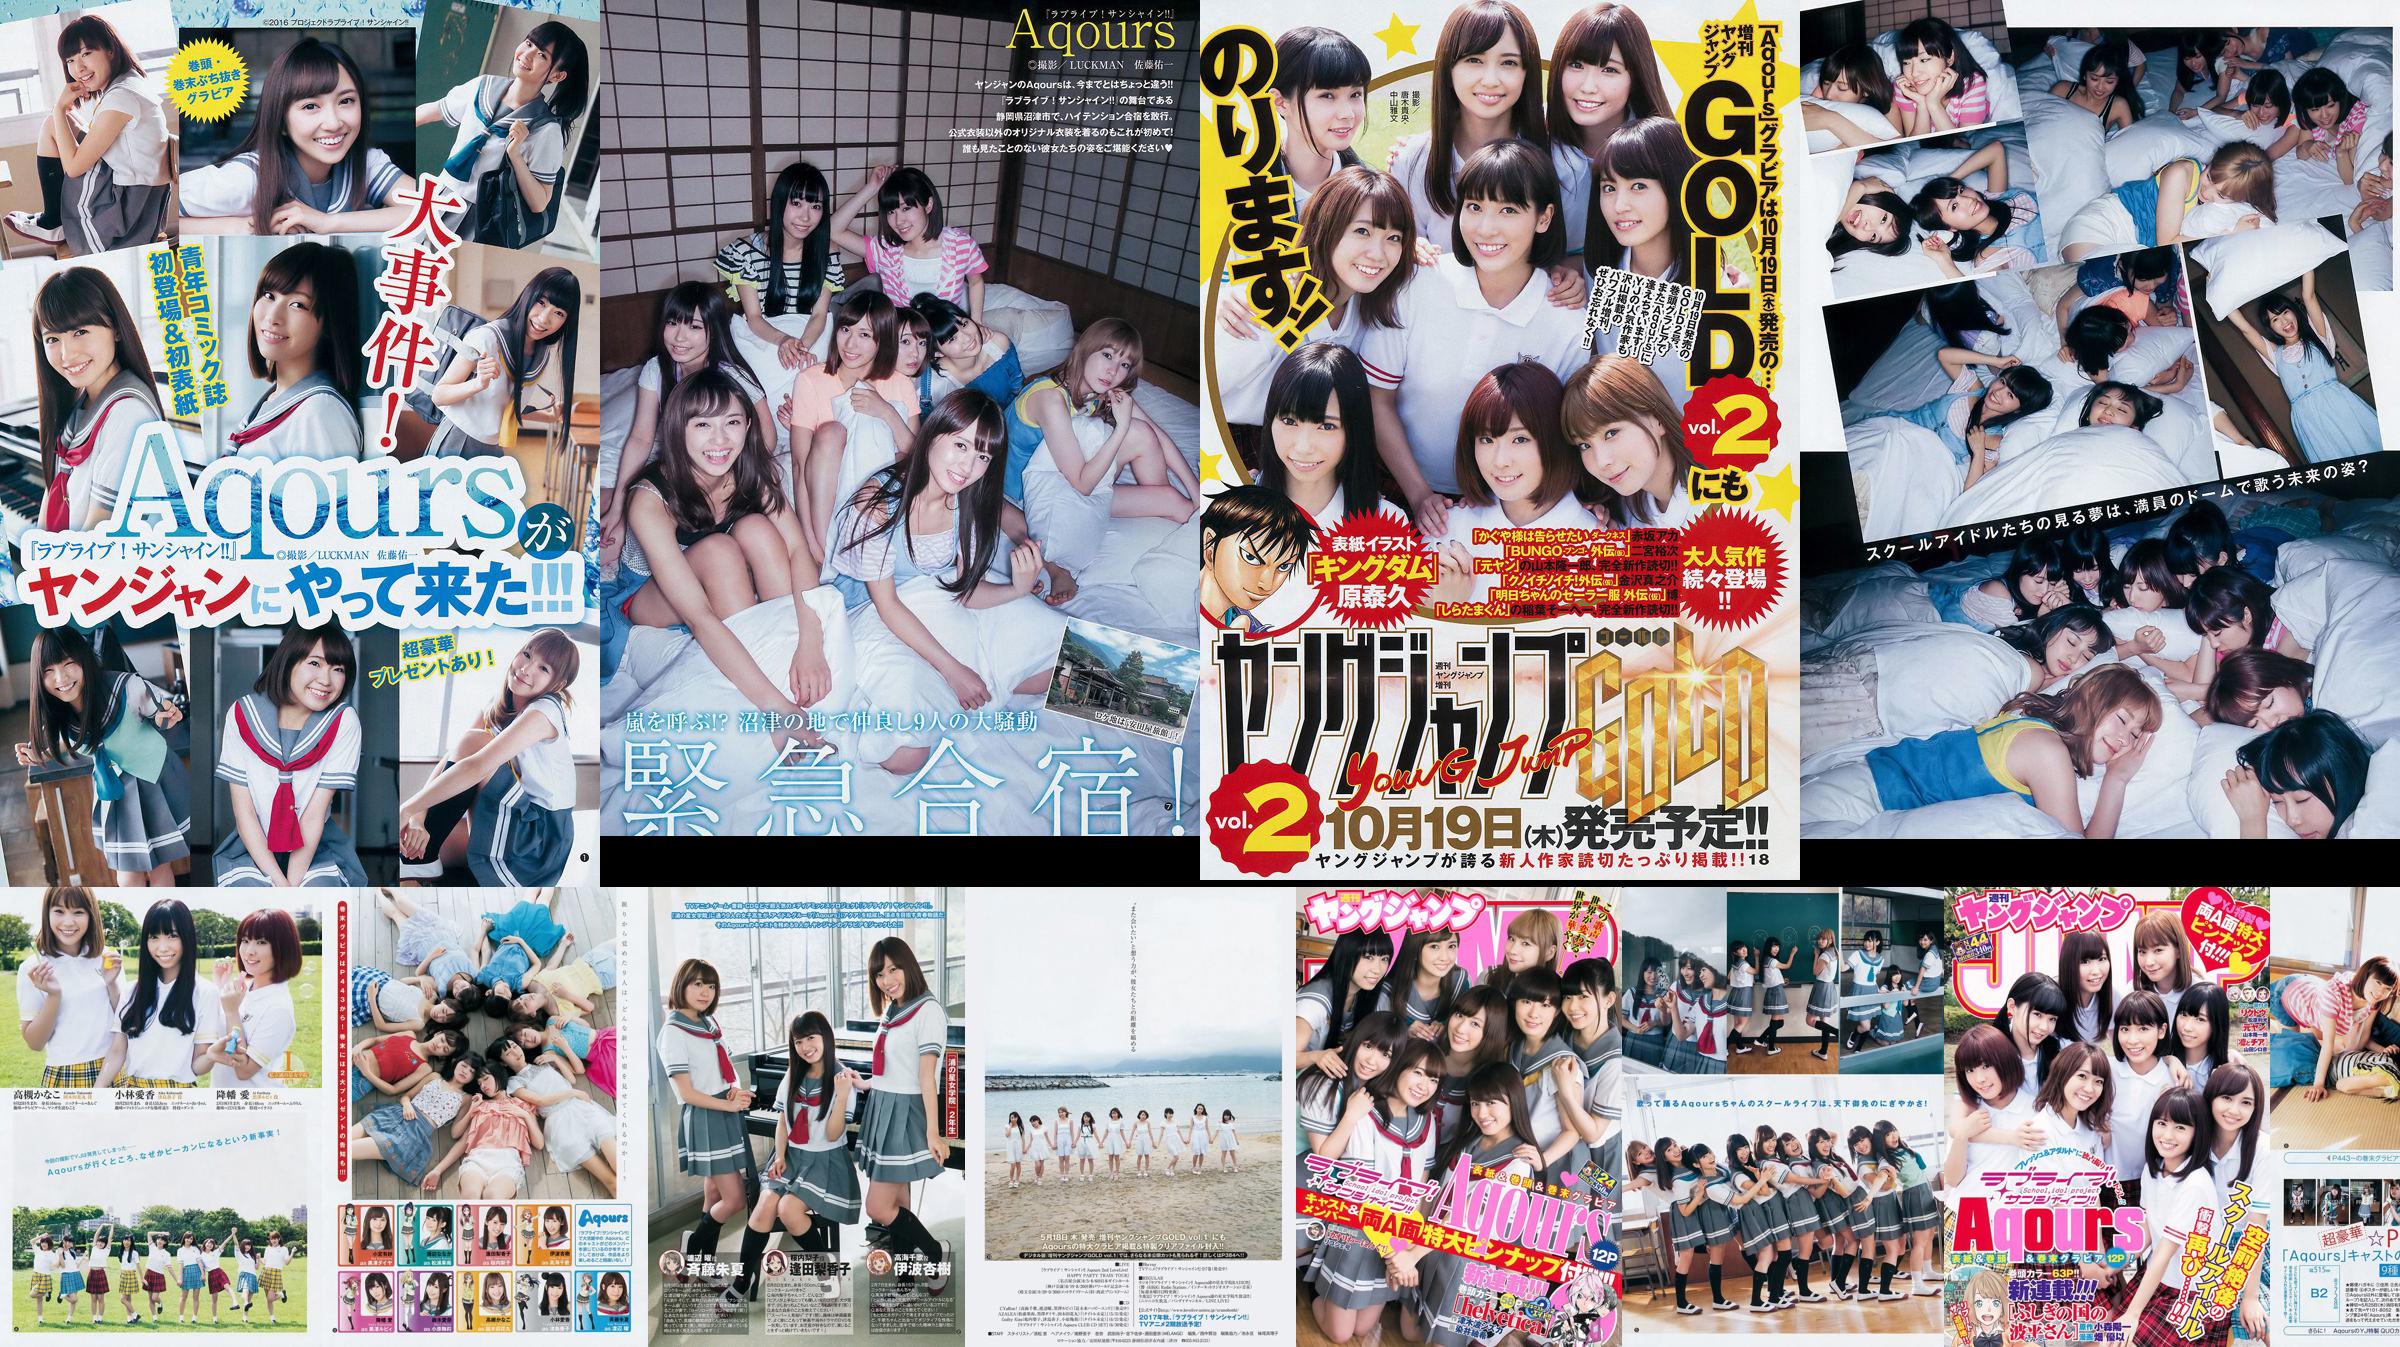 Japan Combination Aqours [Weekly Young Jump] Фото-журнал № 44, 2017 No.6f2690 Страница 4